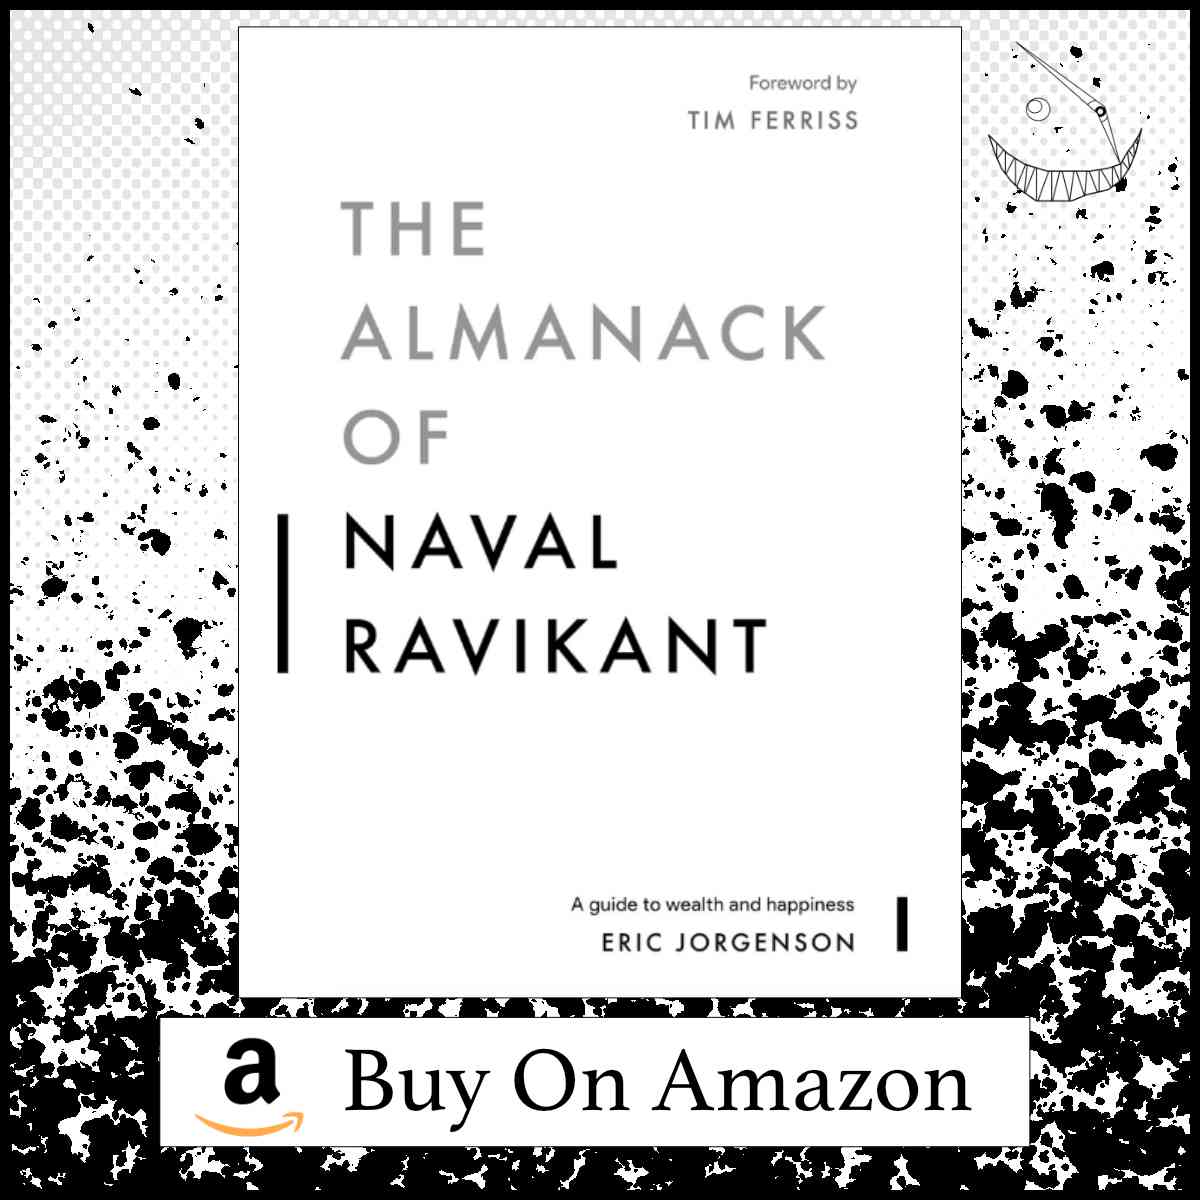 Image Showing The Almanack Of Naval Ravikant